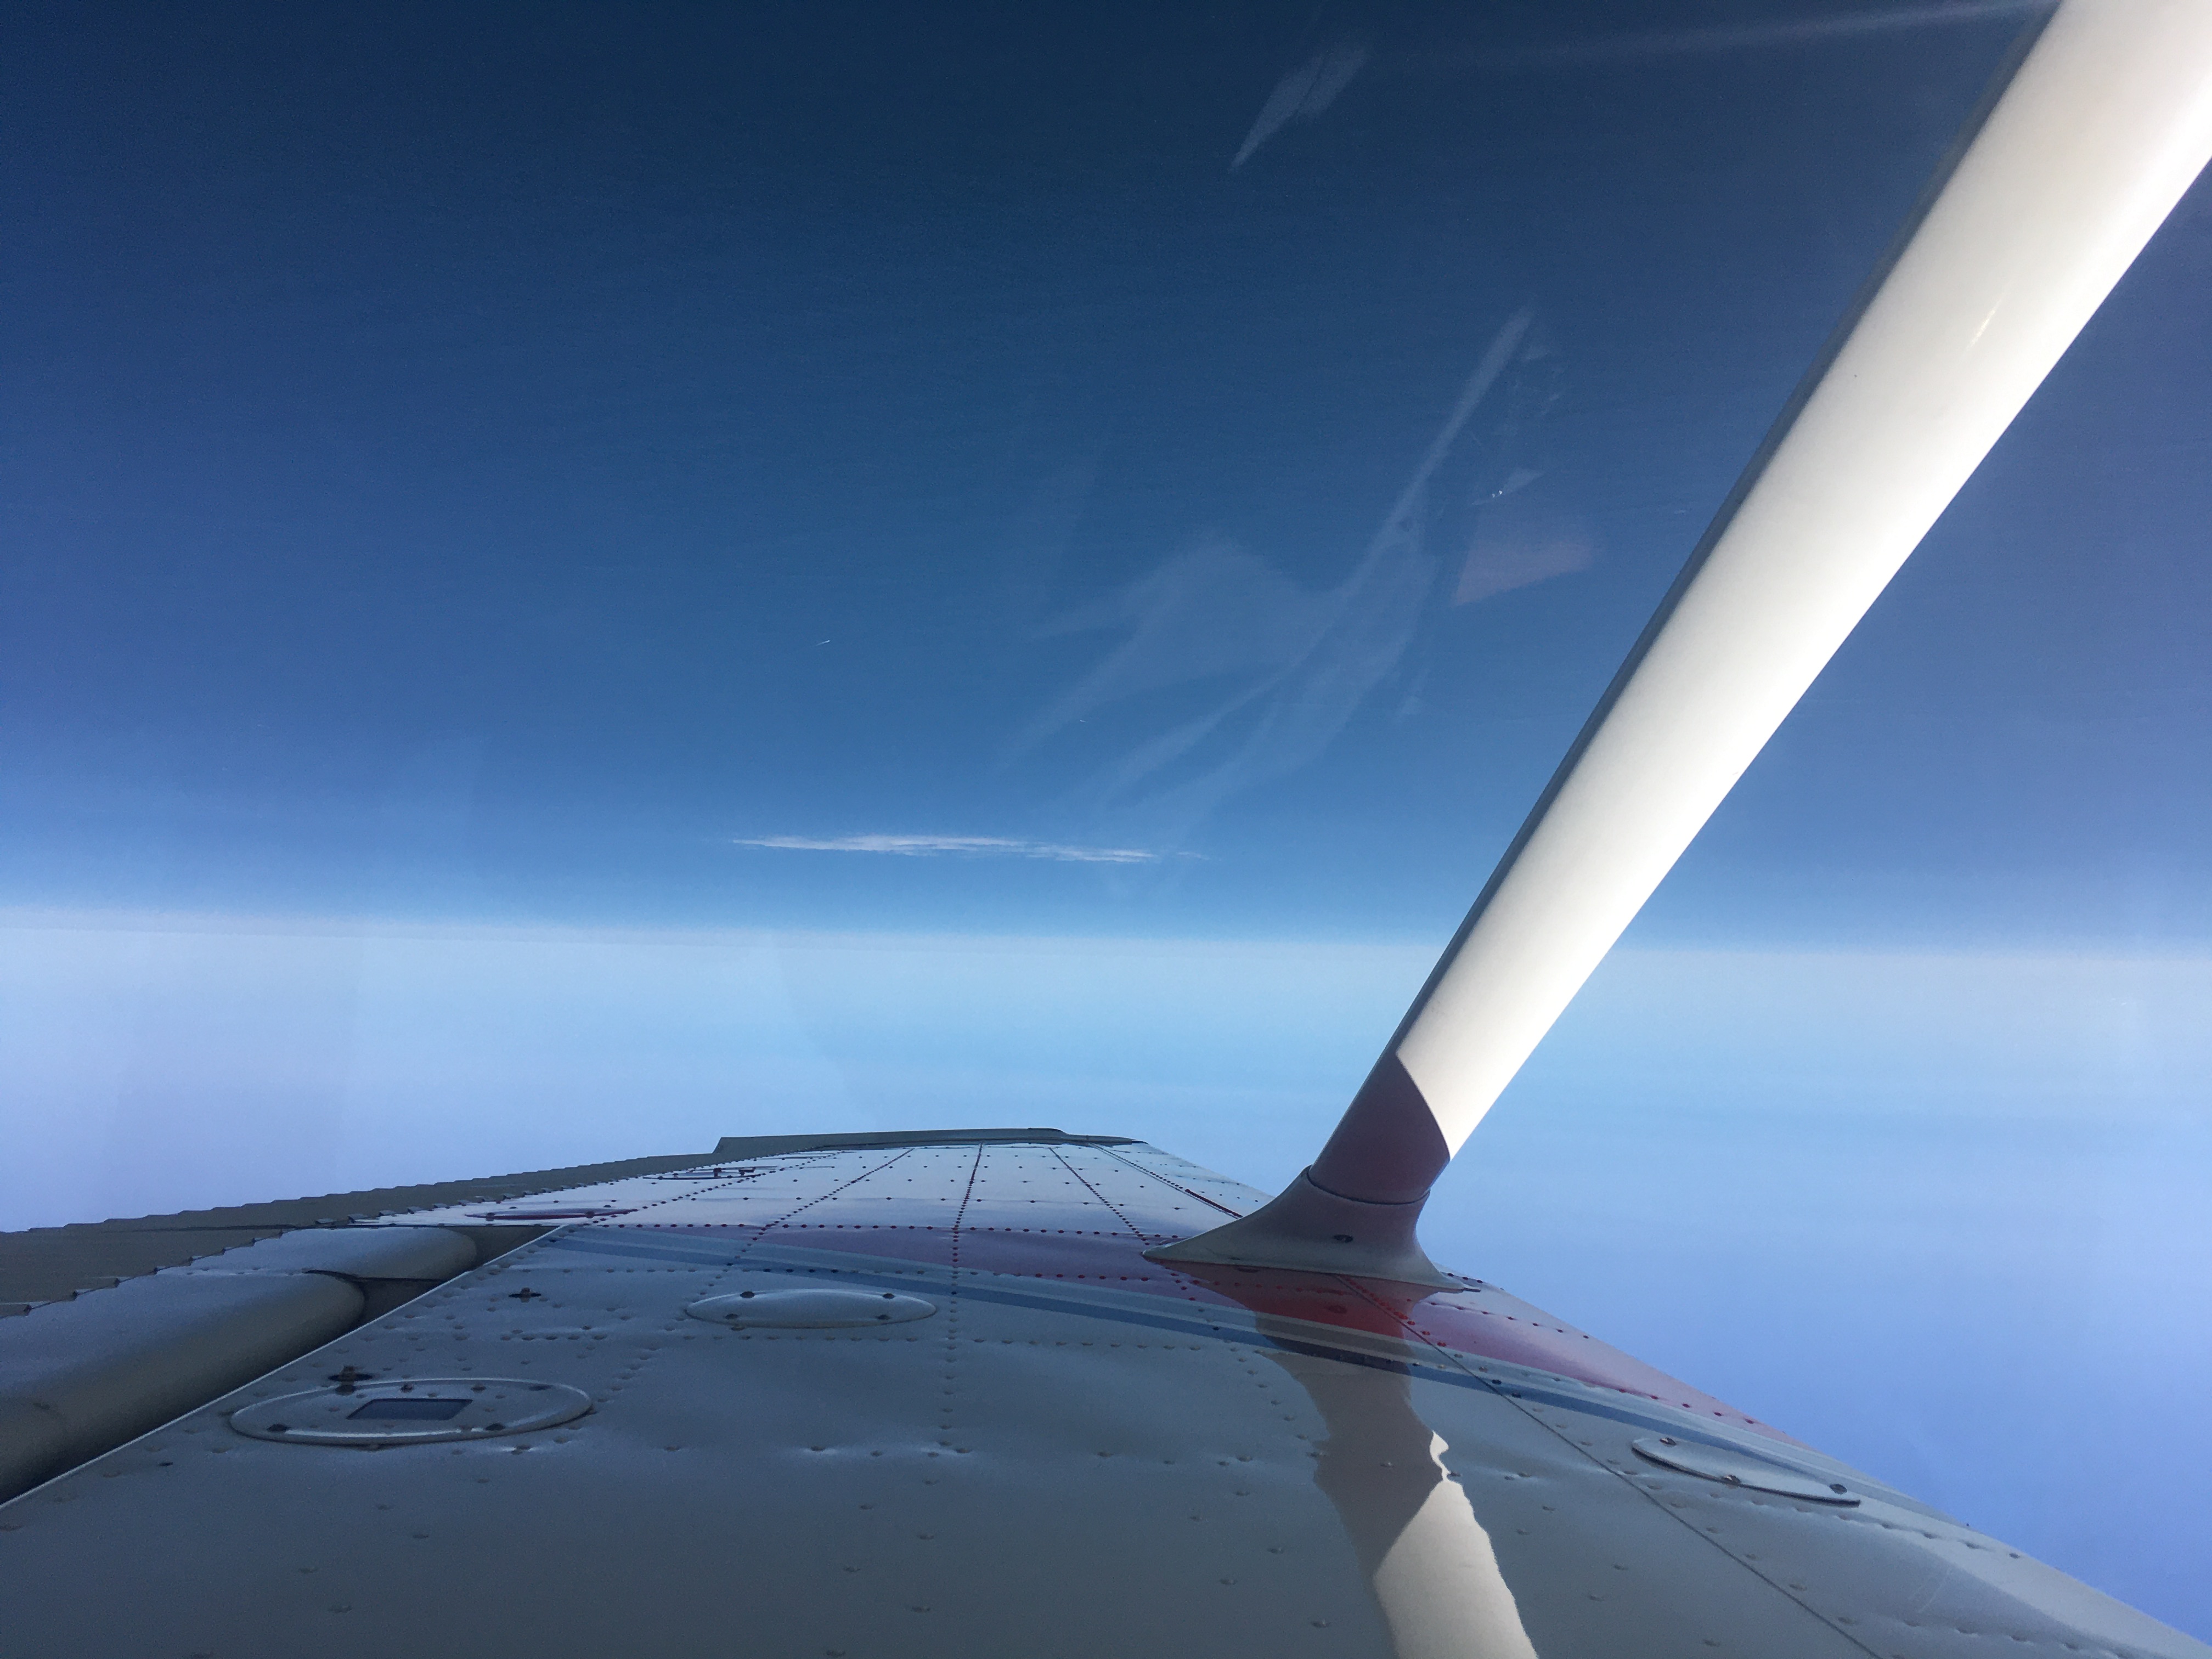 Under the wing of the airplane, the pacific ocean stretches to the horizon, marked by only one small bank of white cloud